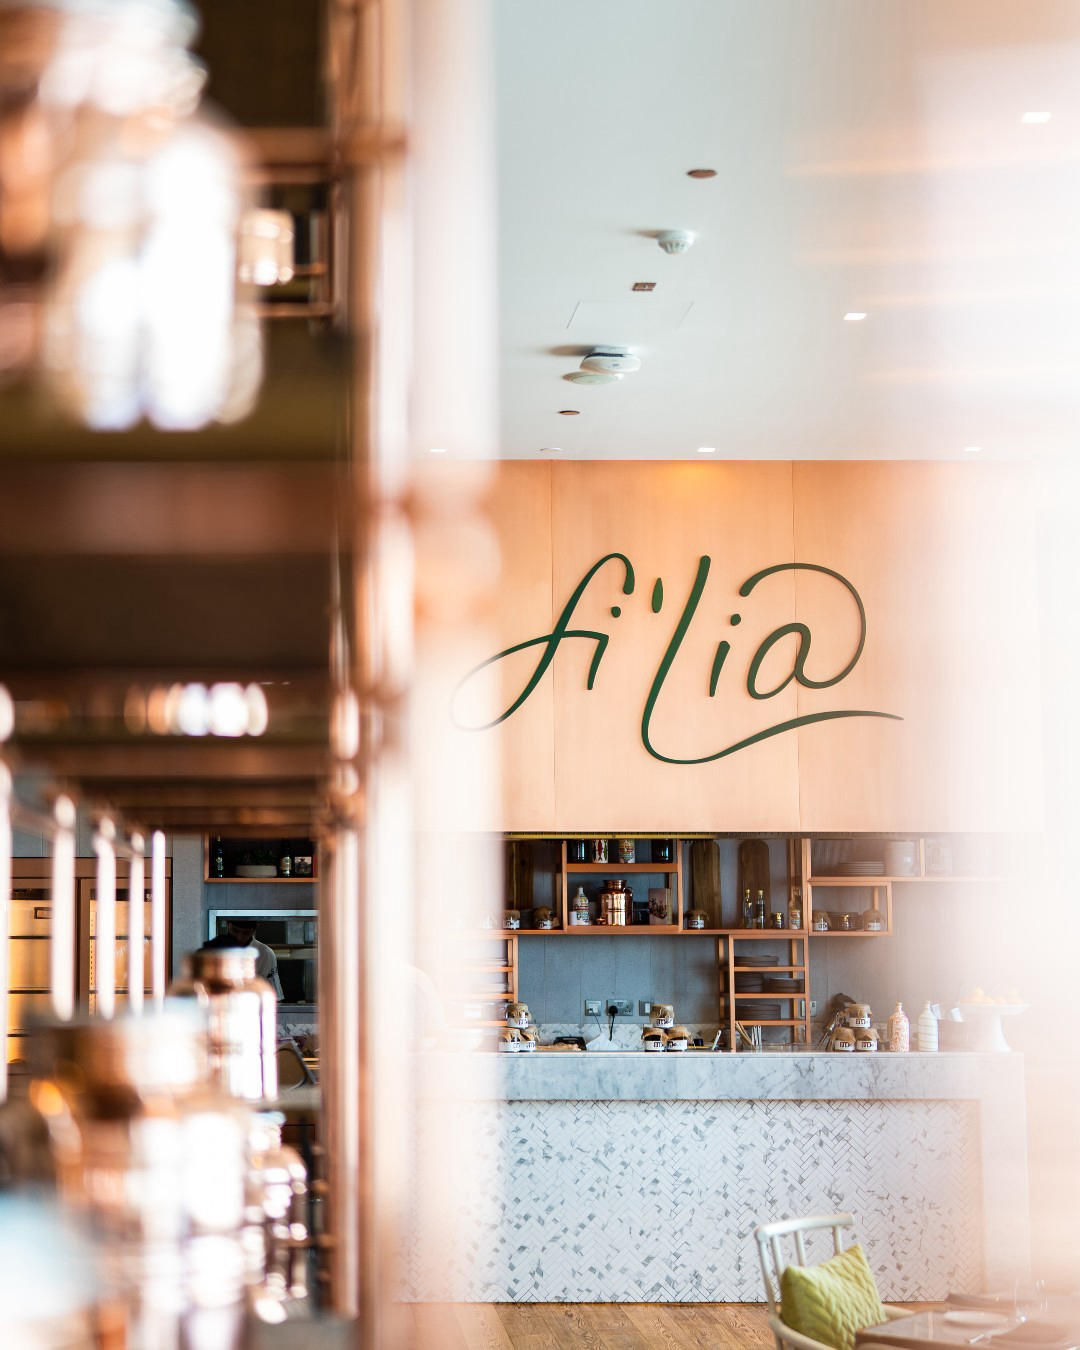 Hop into Easter Sunday at Fi'lia with a spring inspired set menu and a traditional Colomba dessert t